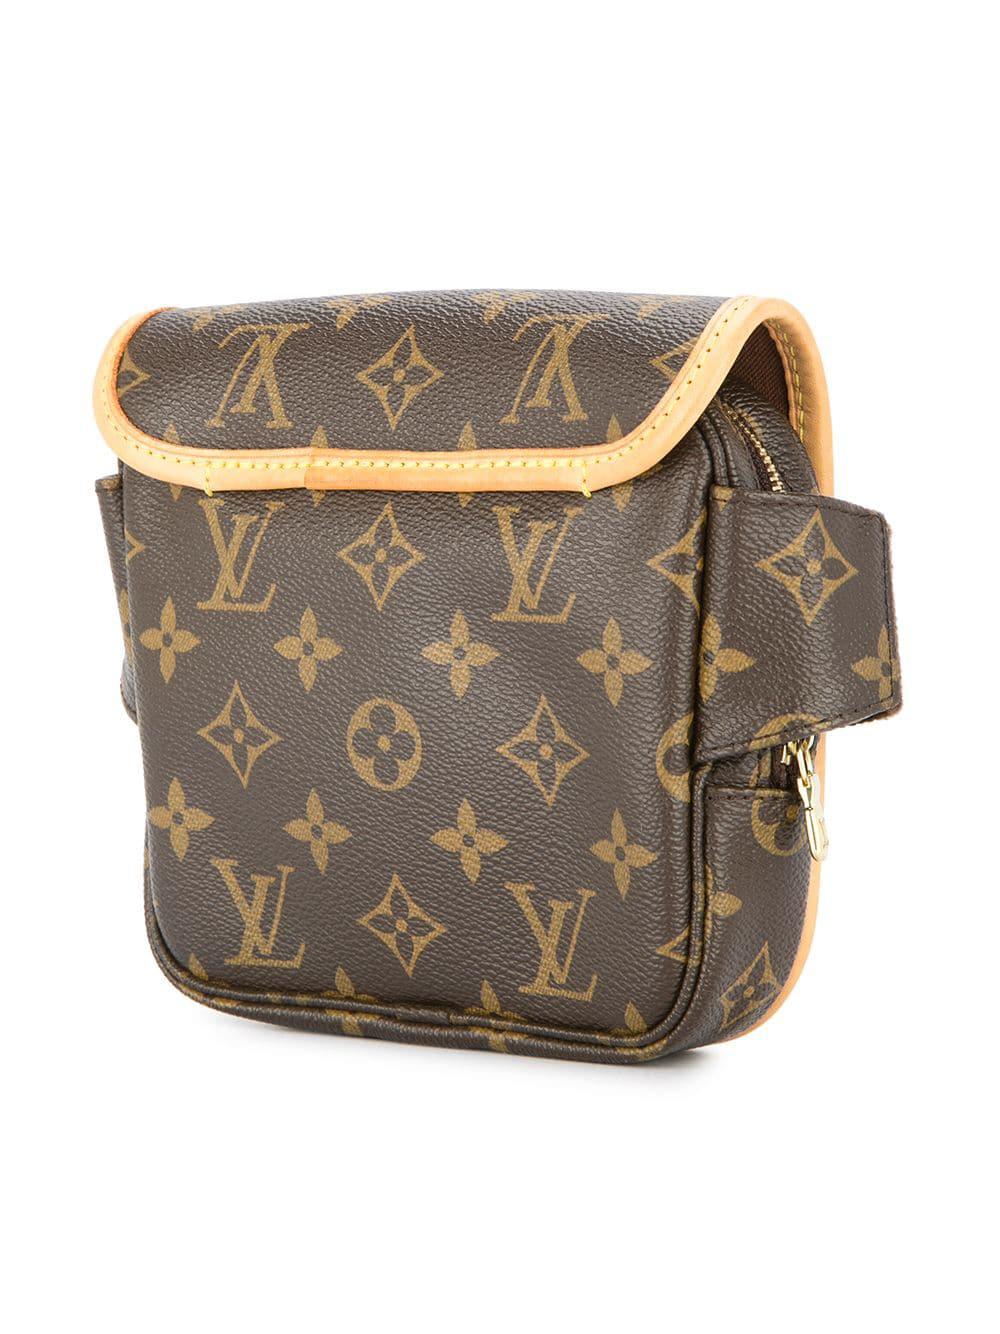 Brown and tan monogram coated canvas Louis Vuitton Bosphore waist